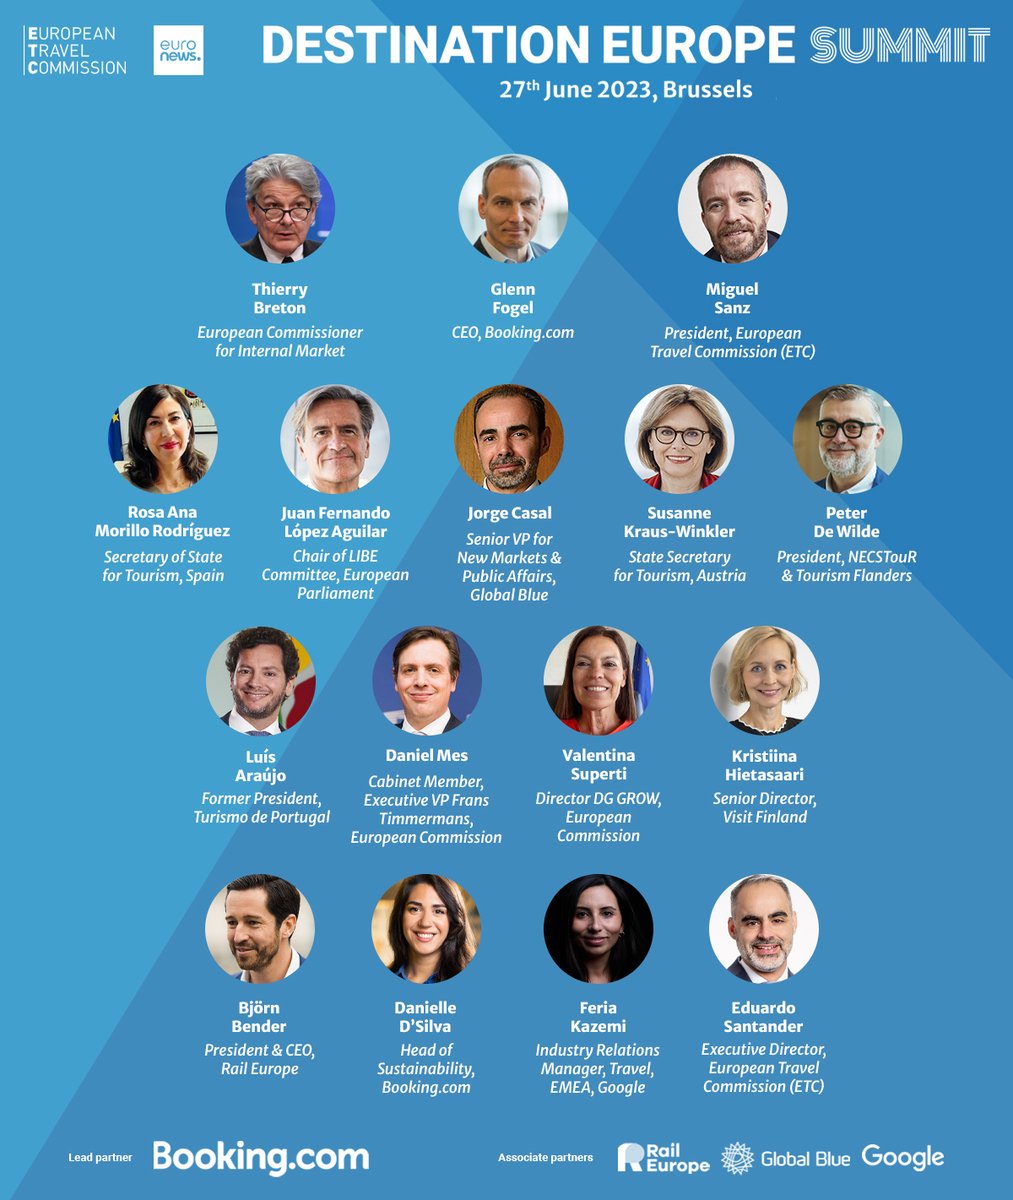 🛎️ #DestinationEuropeSummit is just one day away!

We have an incredible lineup of 🇪🇺 officials and #EUtourism leaders. Get ready to hear from @ThierryBreton, Glenn Fogel @bookingcomPA, @JFLopezAguilar, @DanielMesEU, @VSuperti & more.

Register now 👉 bit.ly/3X3slYr